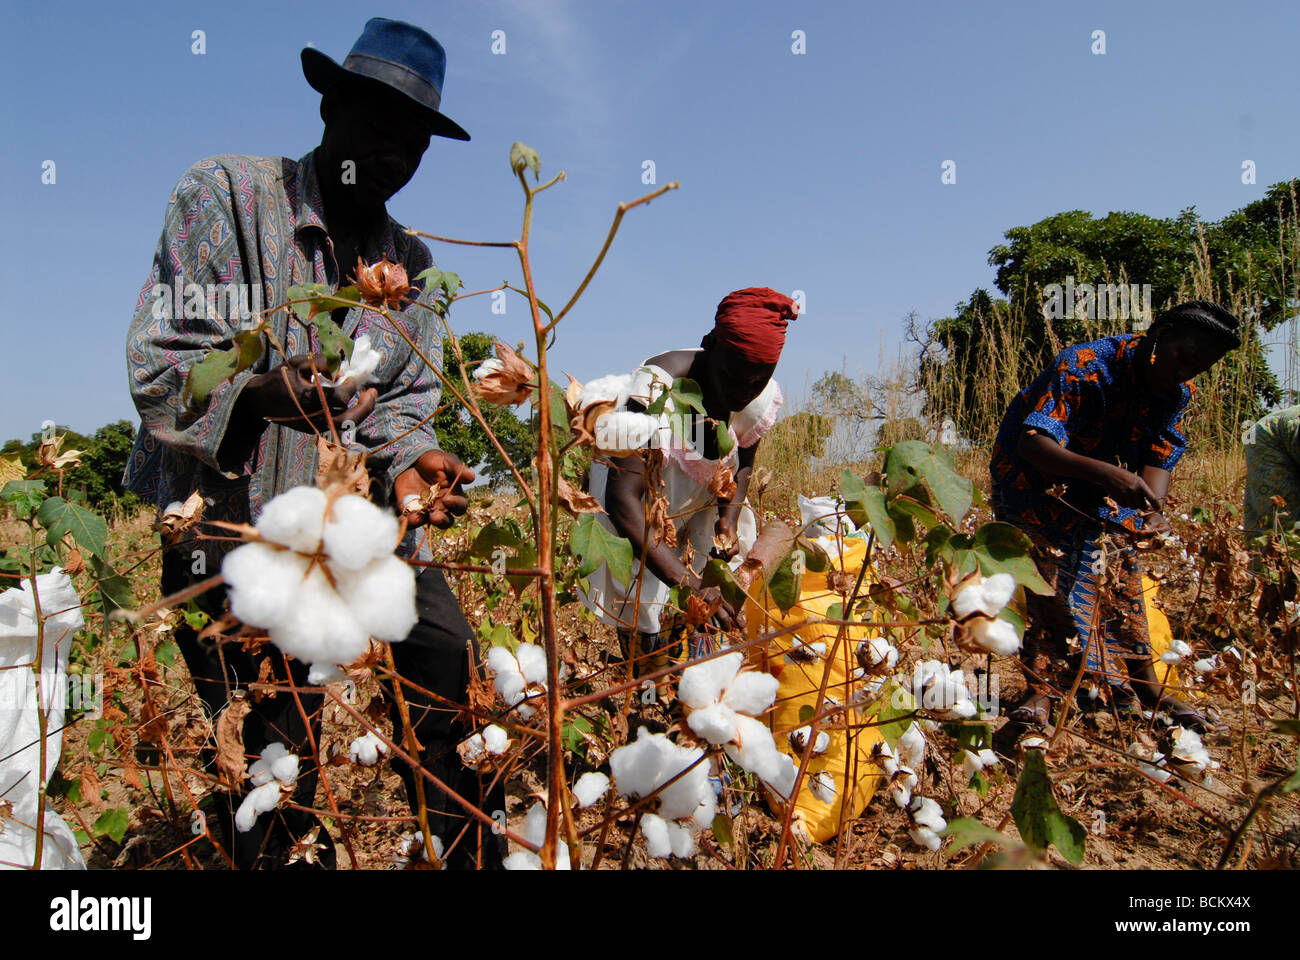 West Africa Burkina Faso , fairtrade and organic cotton project , man and woman harvest cotton at farm Stock Photo